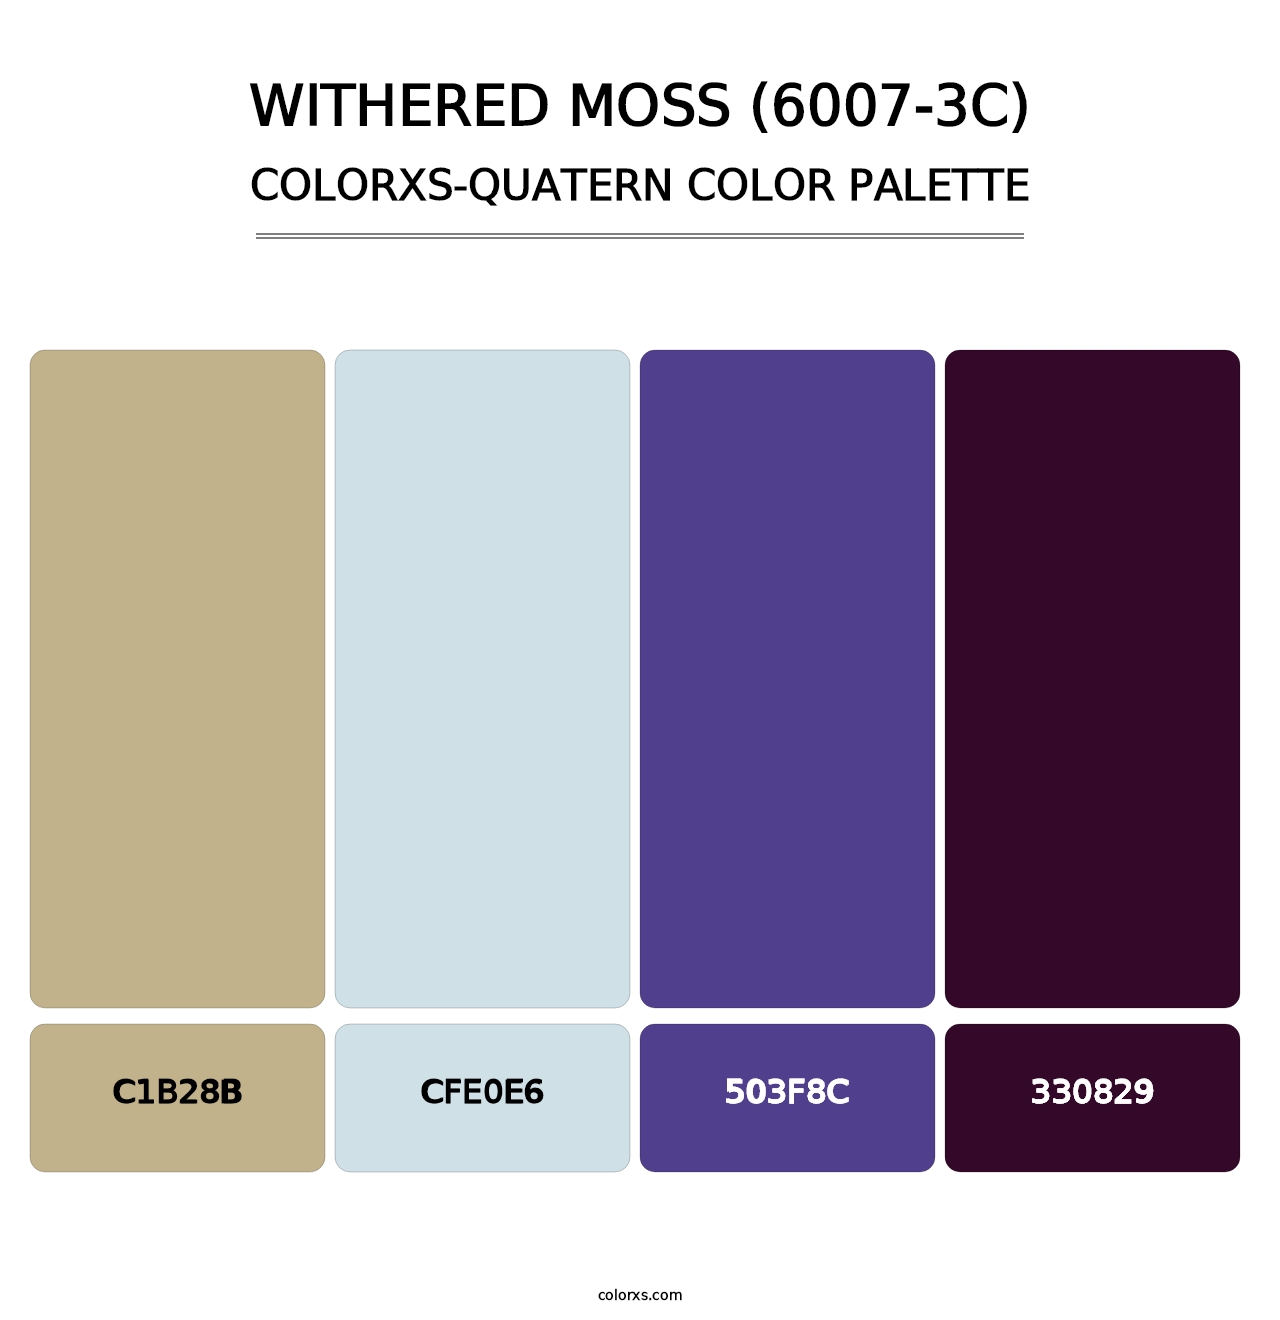 Withered Moss (6007-3C) - Colorxs Quatern Palette